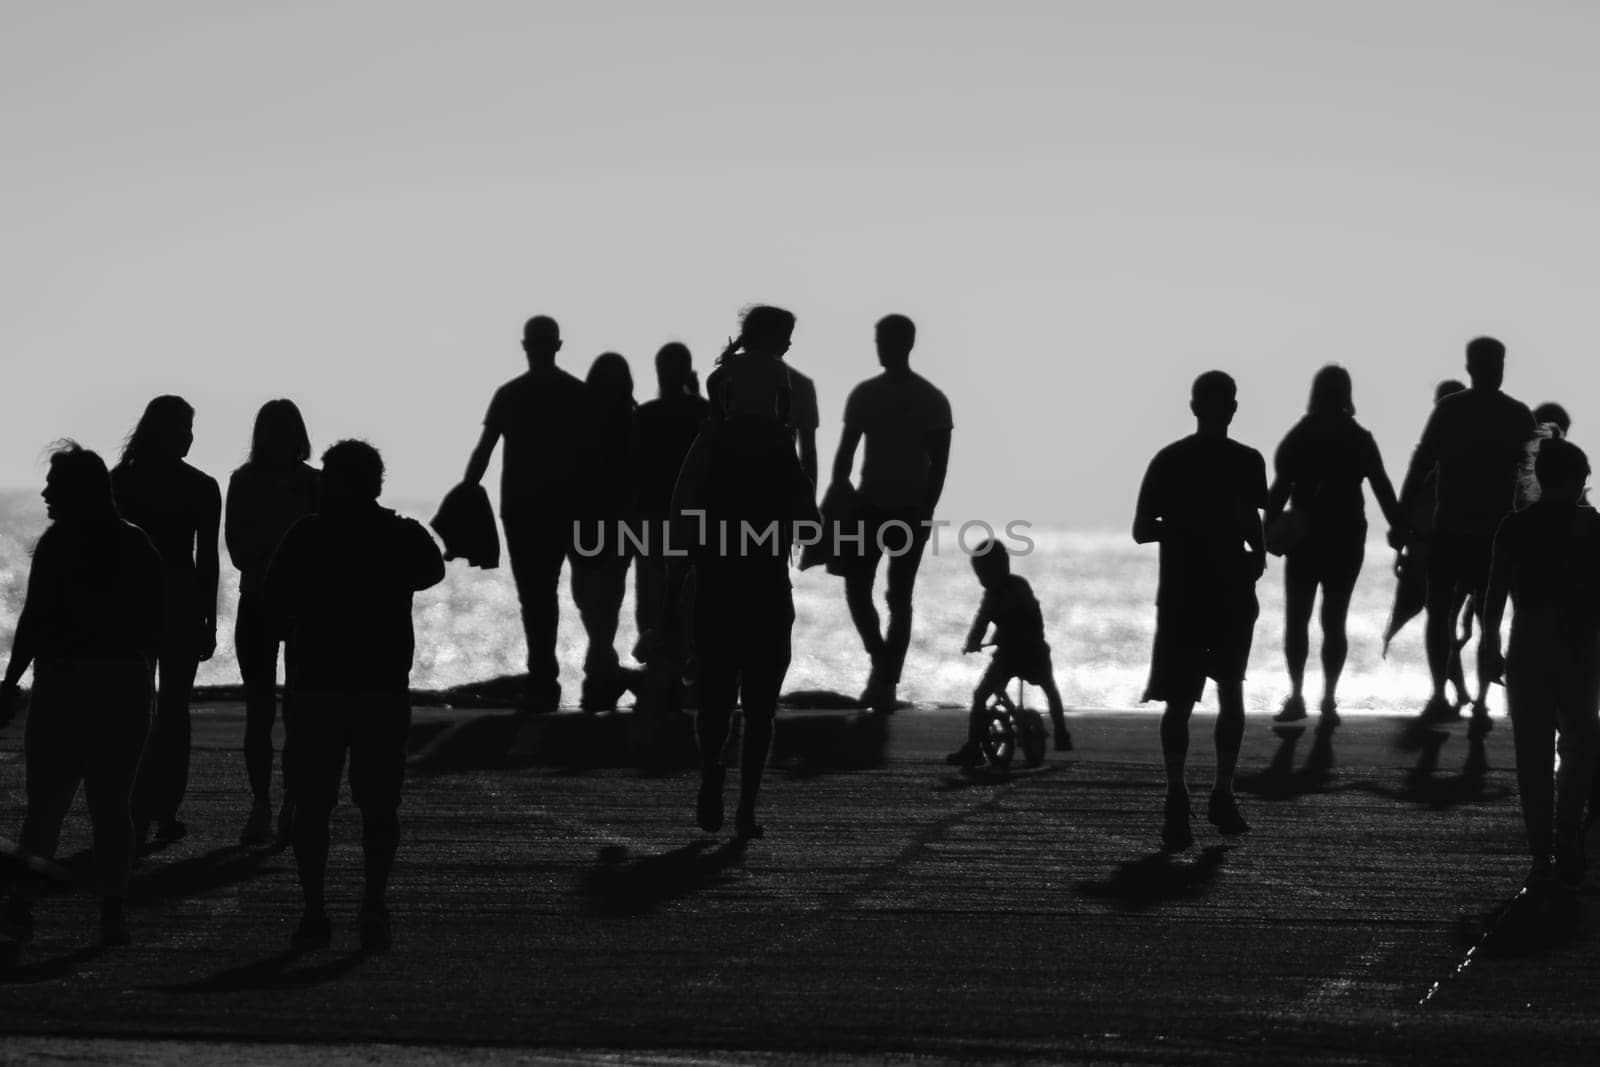 Monochrome image of silhouettes of people walking at sunset. Mid shot